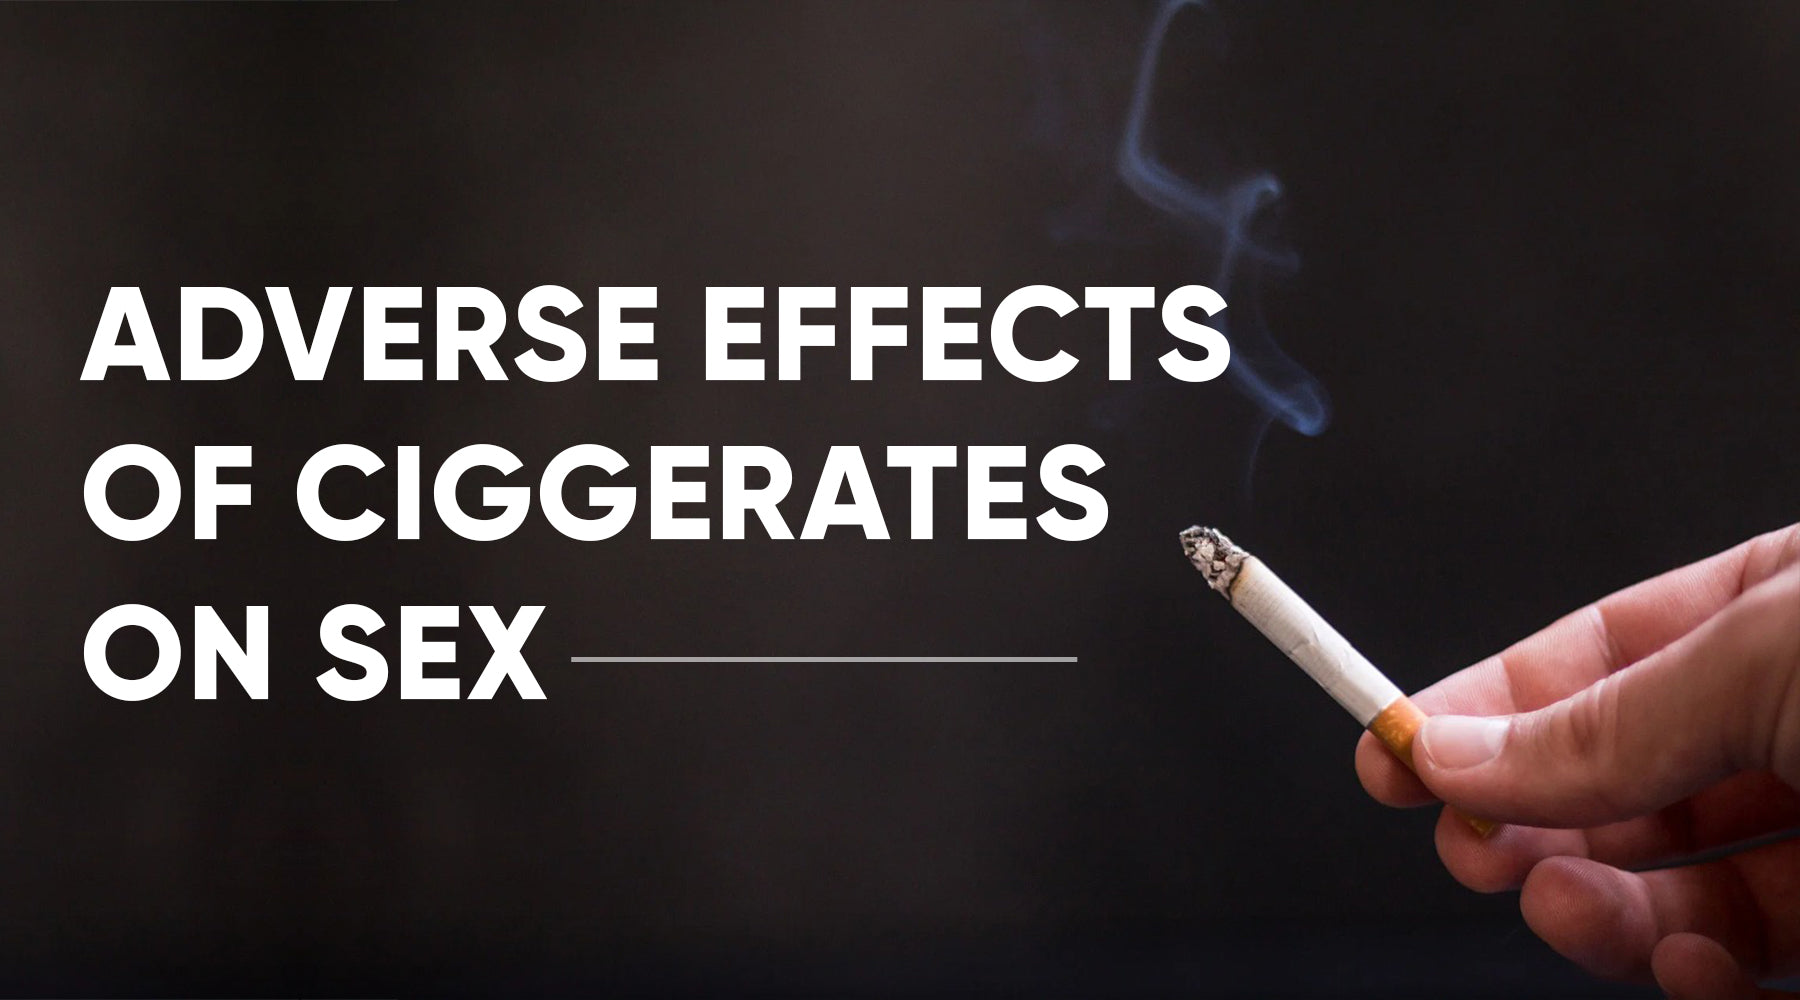 ADVERSE EFFECTS OF CIGARETTES ON SEX